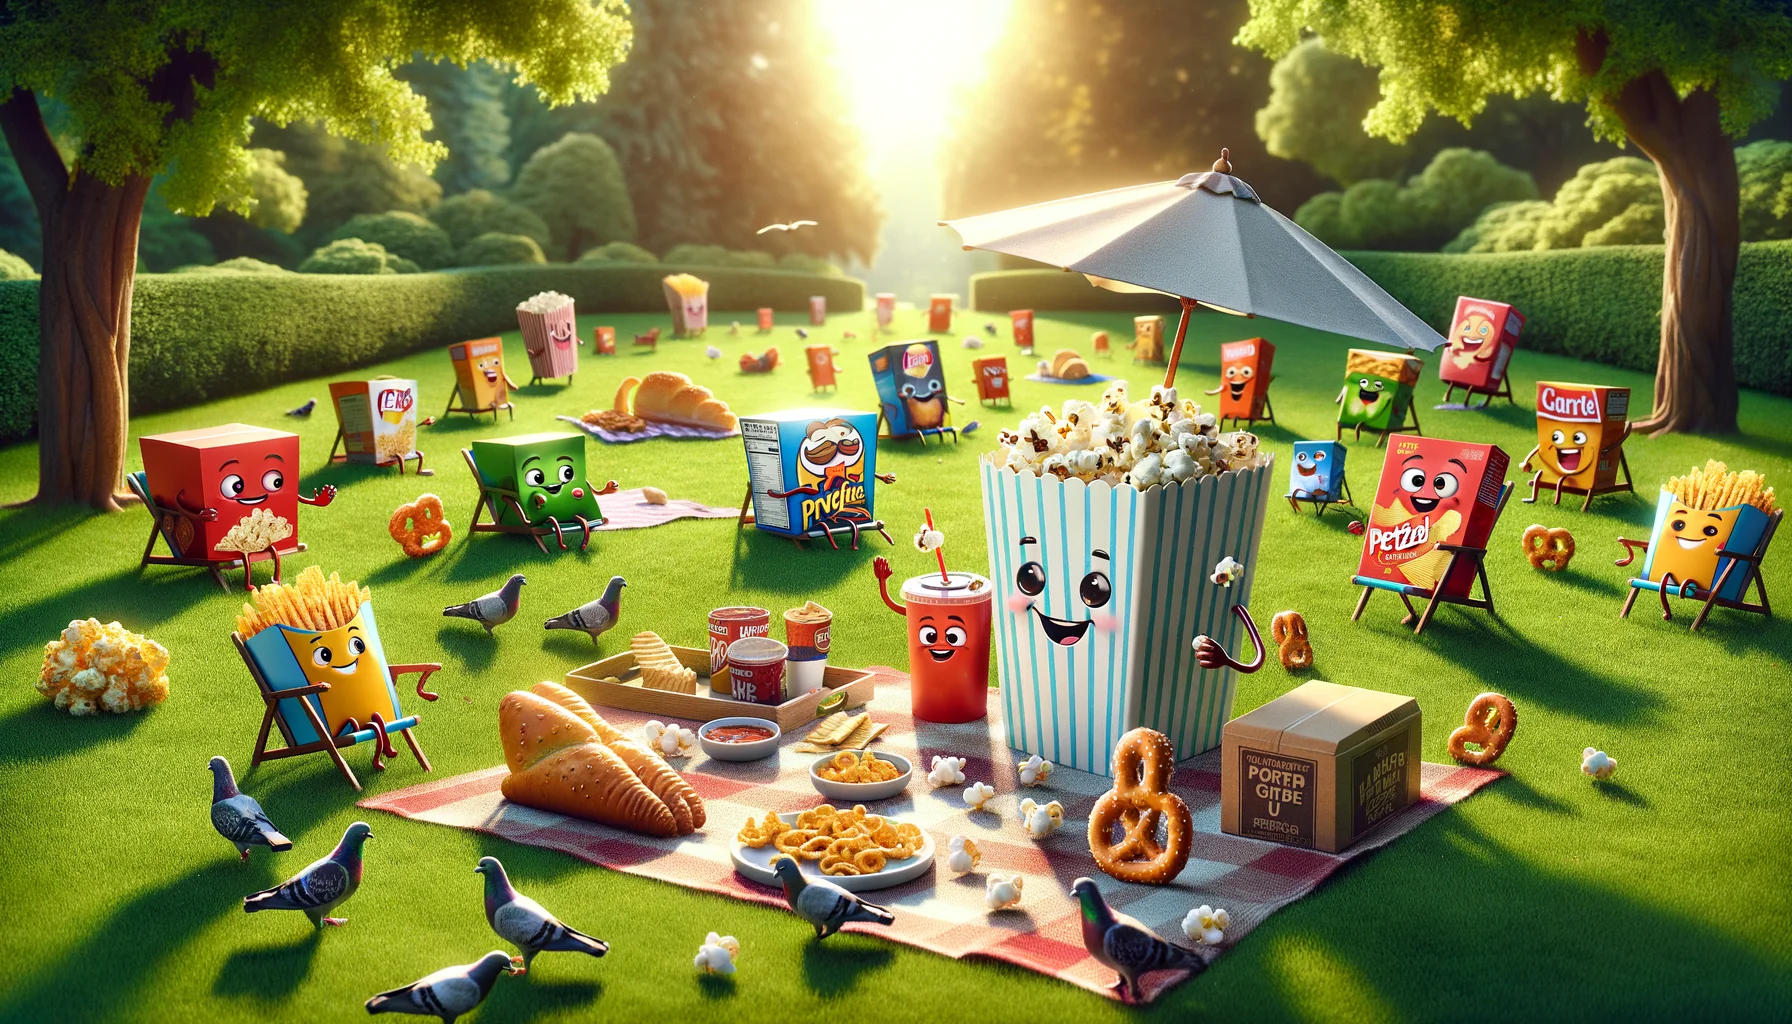 Imagine a humorous and life-like scenario where snack boxes are enjoying their perfect day. View a sunny picnic setting in a lush, vibrant park. There are various snack boxes scattered around, all anthropomorphized with smiling faces and tiny hands and feet. A popcorn box is tossing pieces of popcorn to pigeons, while a chip box is sunbathing under a parasol. An army of mini pretzel wraps are forming an adorable conga line. All around, other snack boxes are engaging in activities, immersed in their fun-filled day. Create this scene with a touch of realism, yet keep it light-hearted and funny.